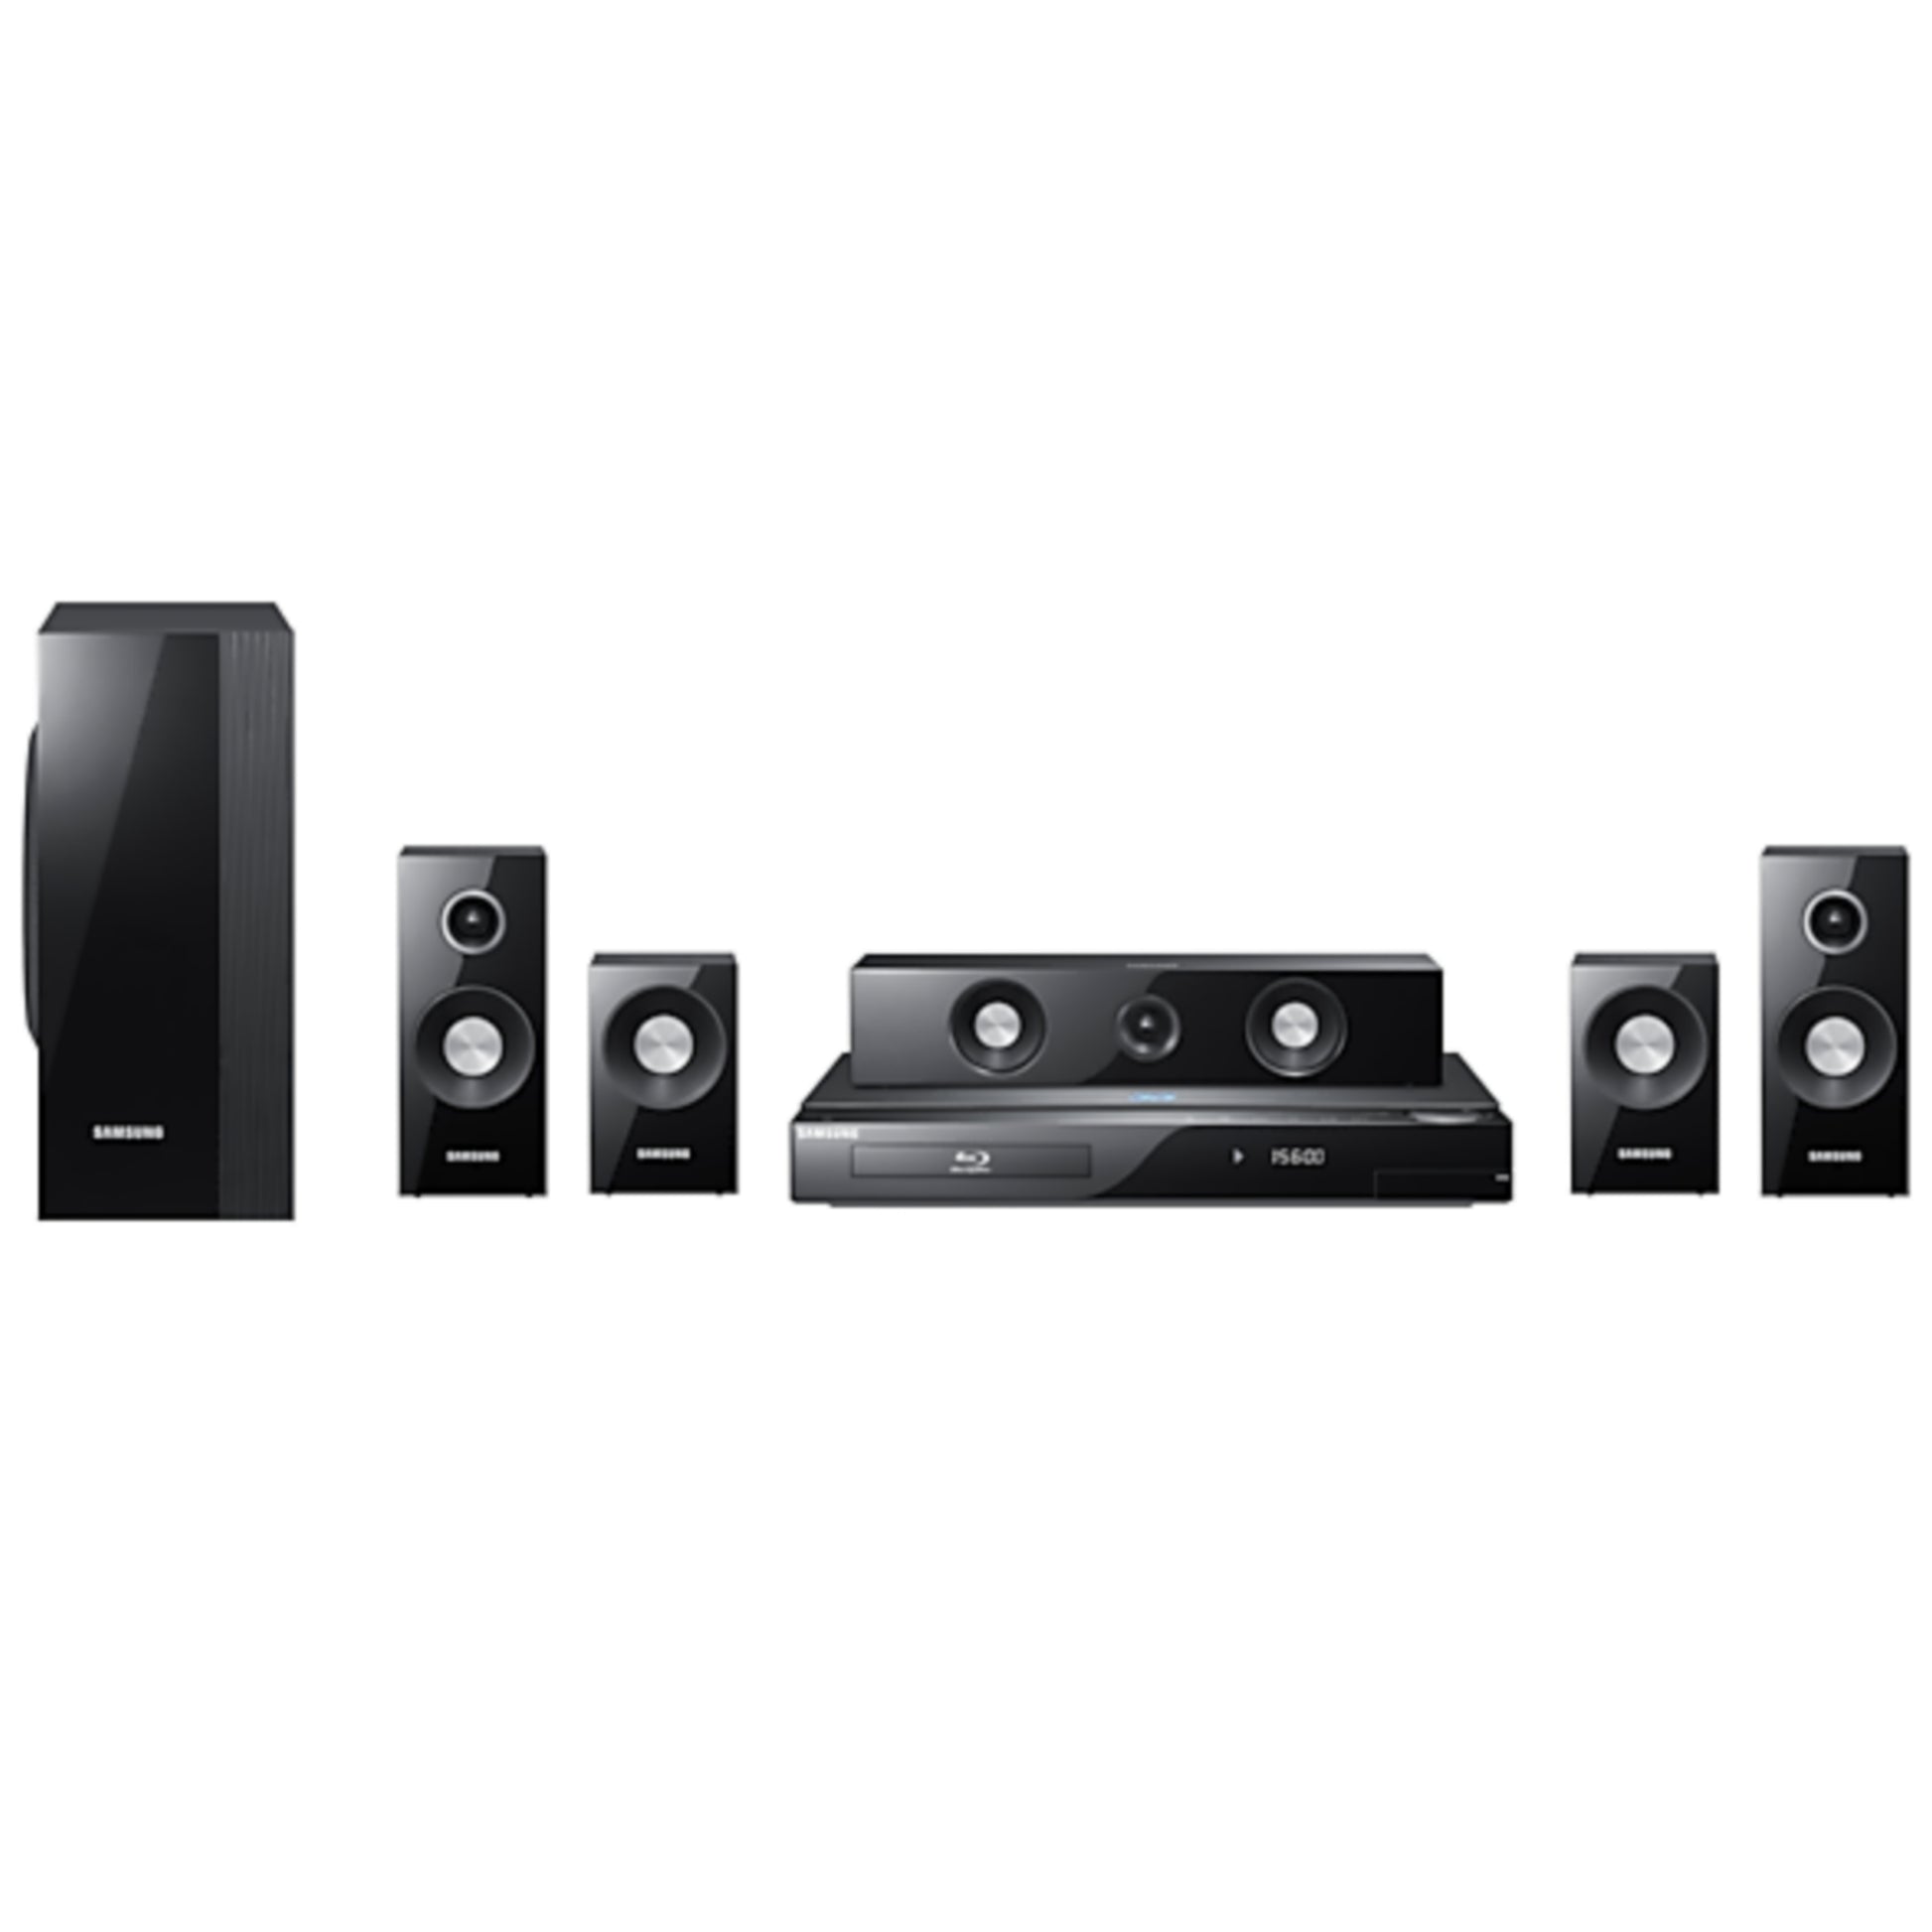 Samsung HT-C5900 1000Watts Blu-ray 3D DVD Home Theater Complete Set - Foreign Used